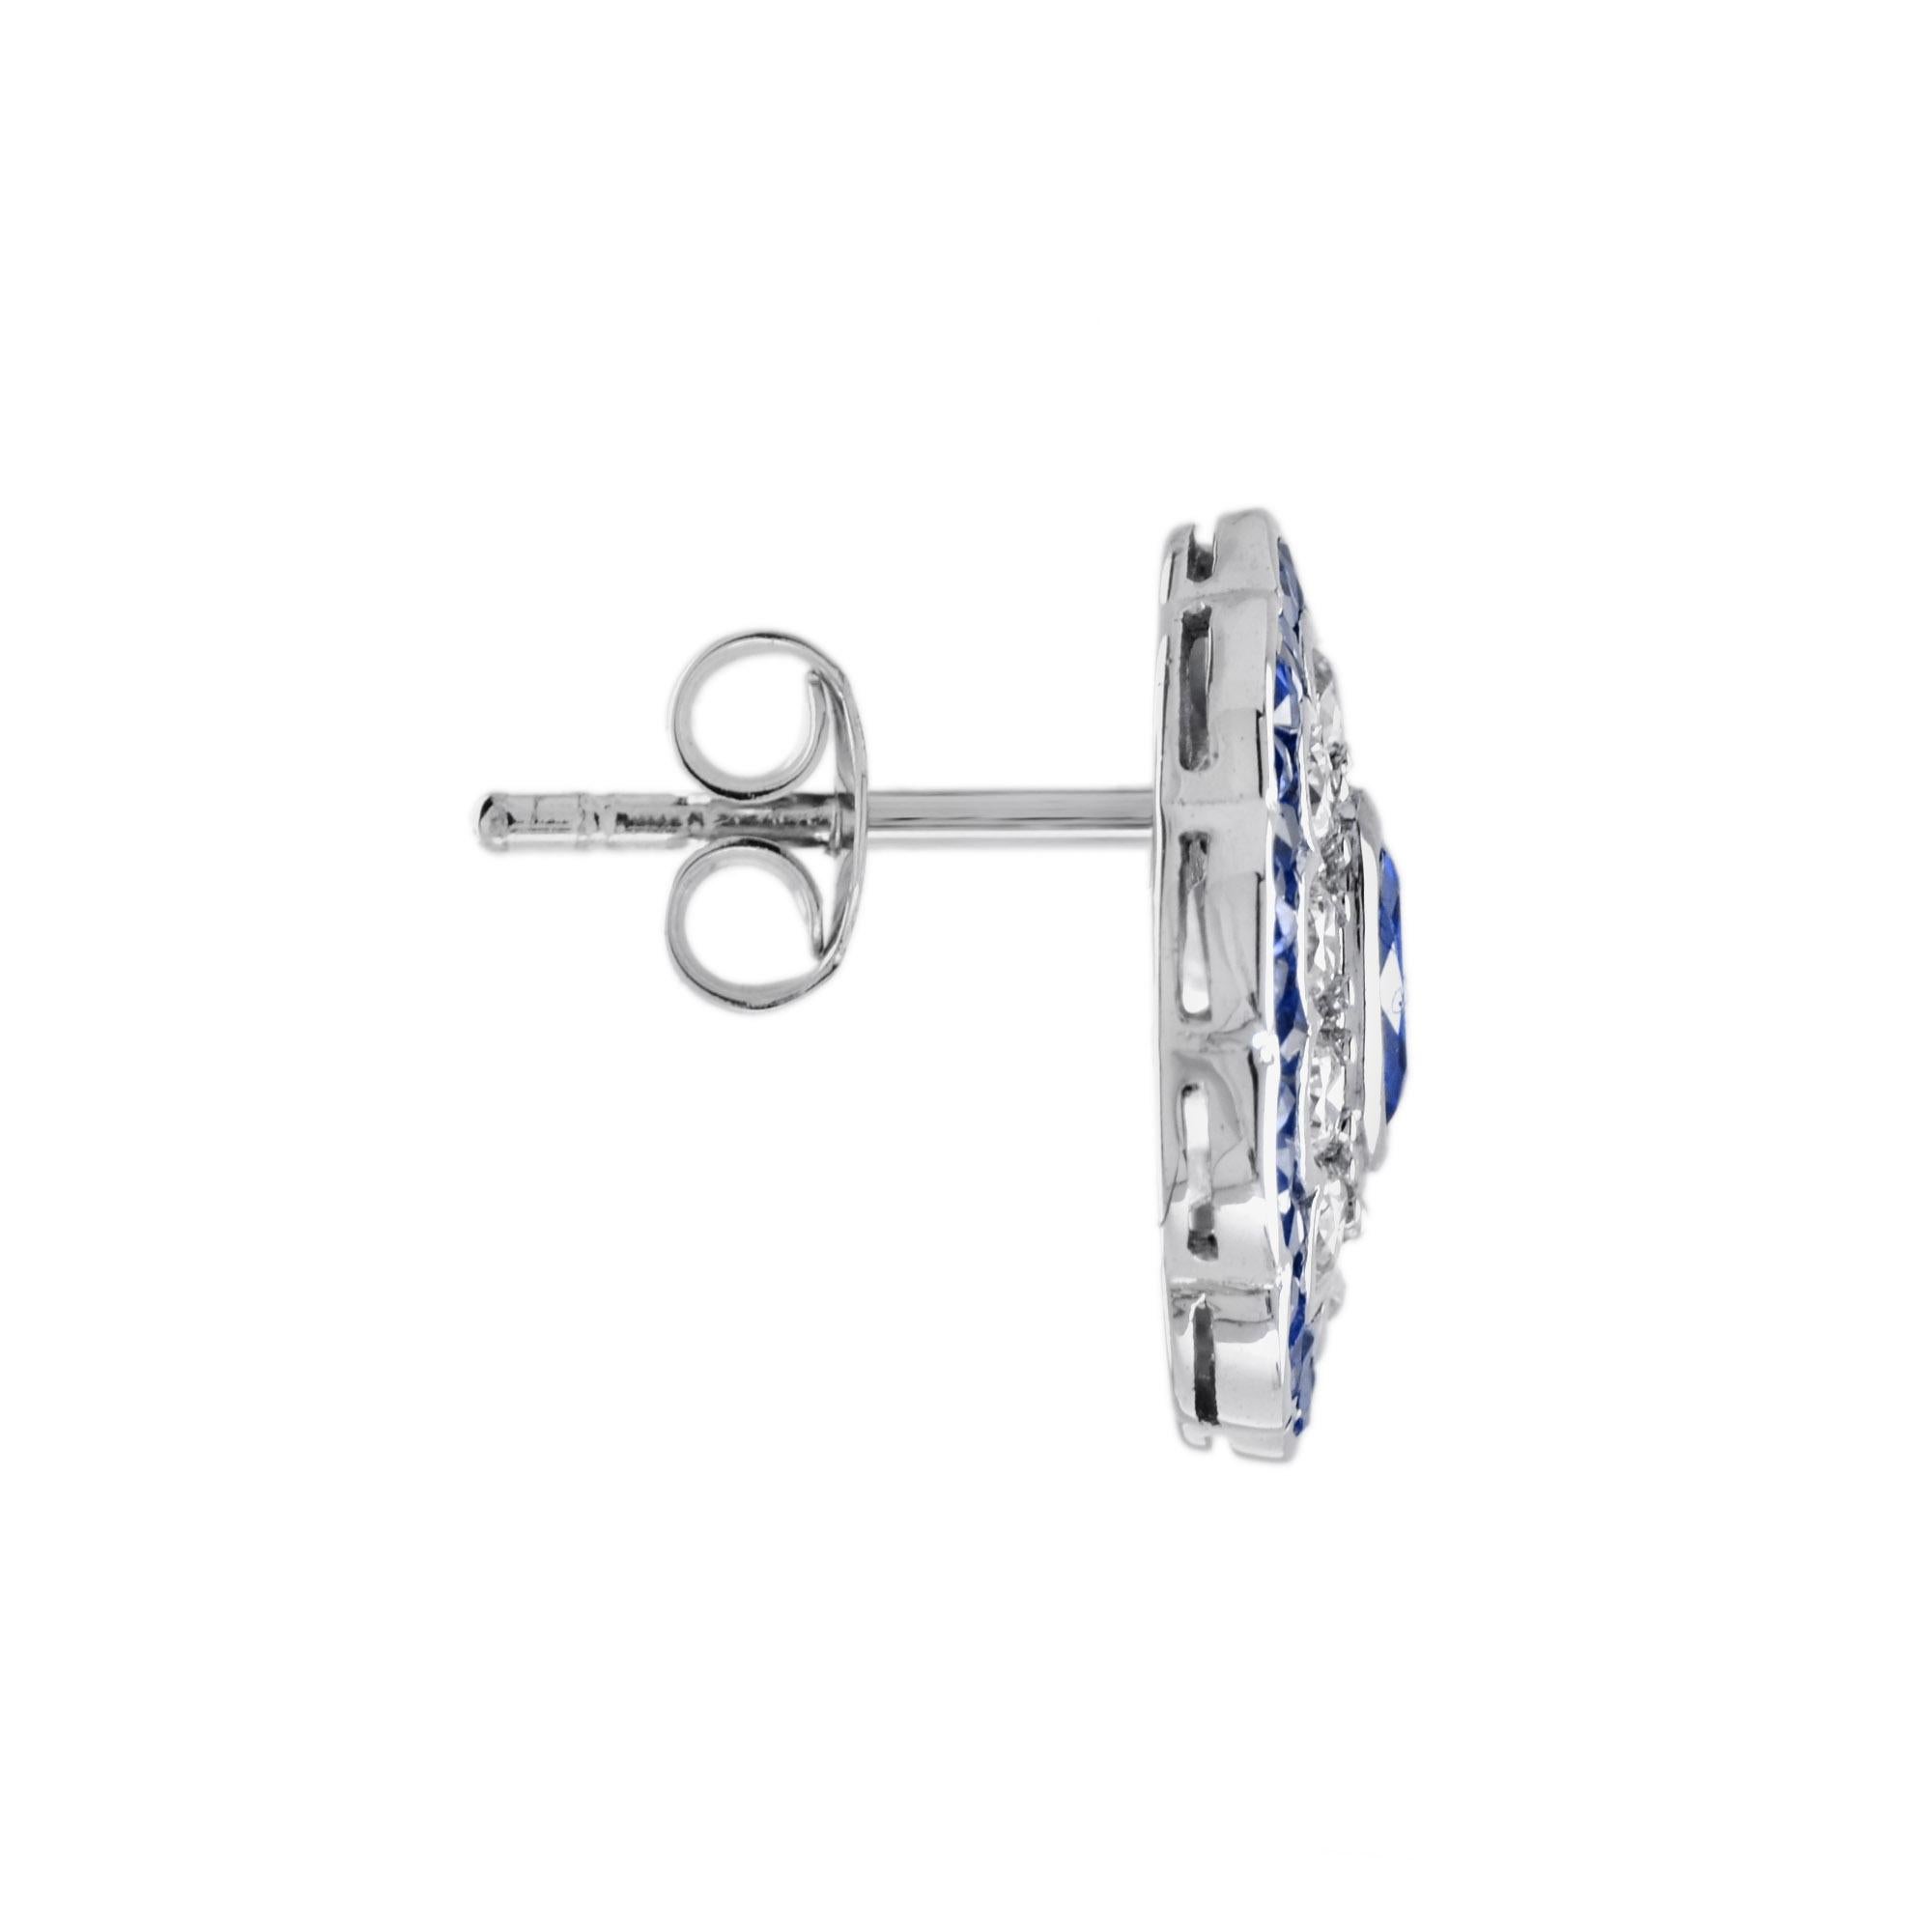 A lovely pair of floral earrings for anyone who loves antique-inspired jewelry. Made of dazzling oval blue sapphire and round cut diamond set in18k white gold. Each features .30 carat sapphire center surrounded by ten diamonds form a flower with a